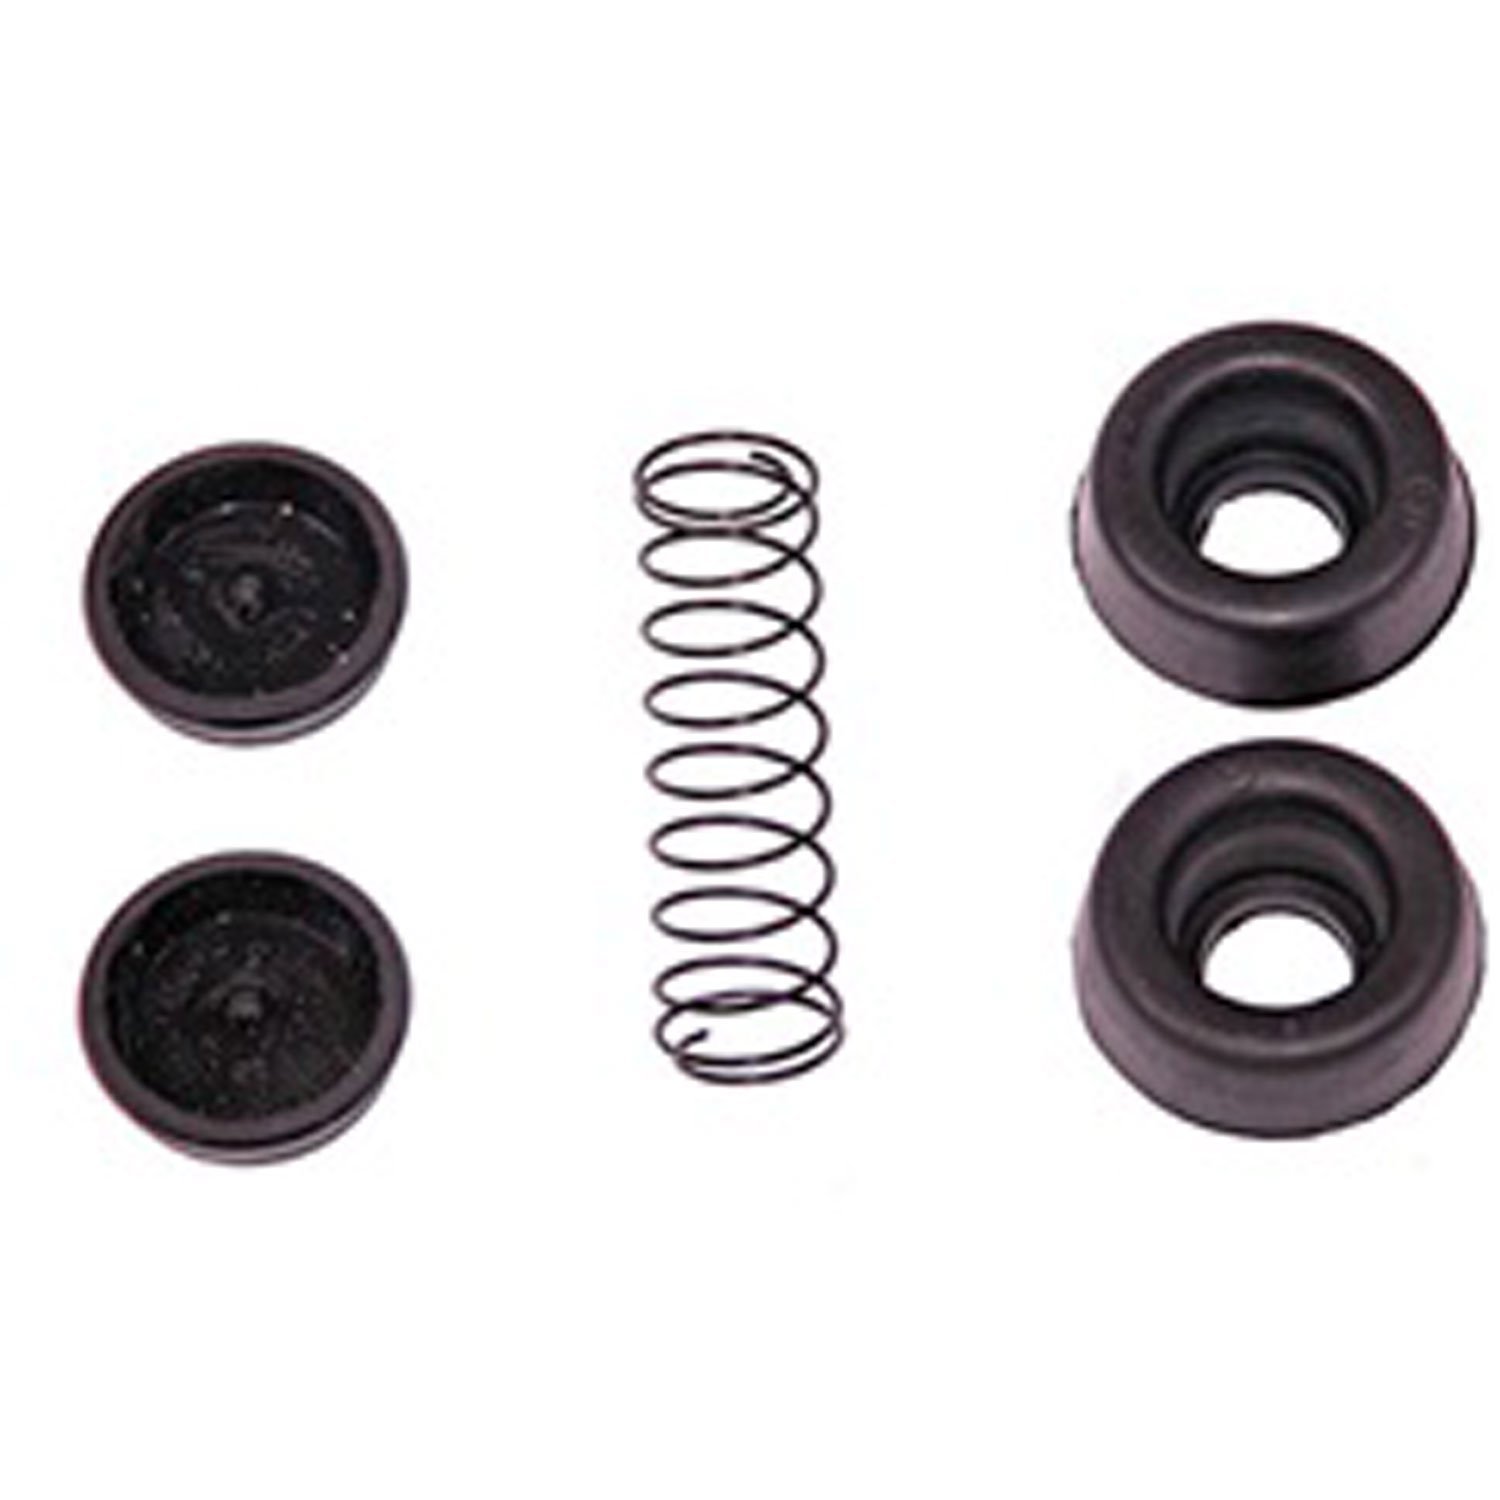 This wheel cylinder repair kit from Omix-ADA allows you to rebuild wheel cylinders with a 3/4 inch bore.